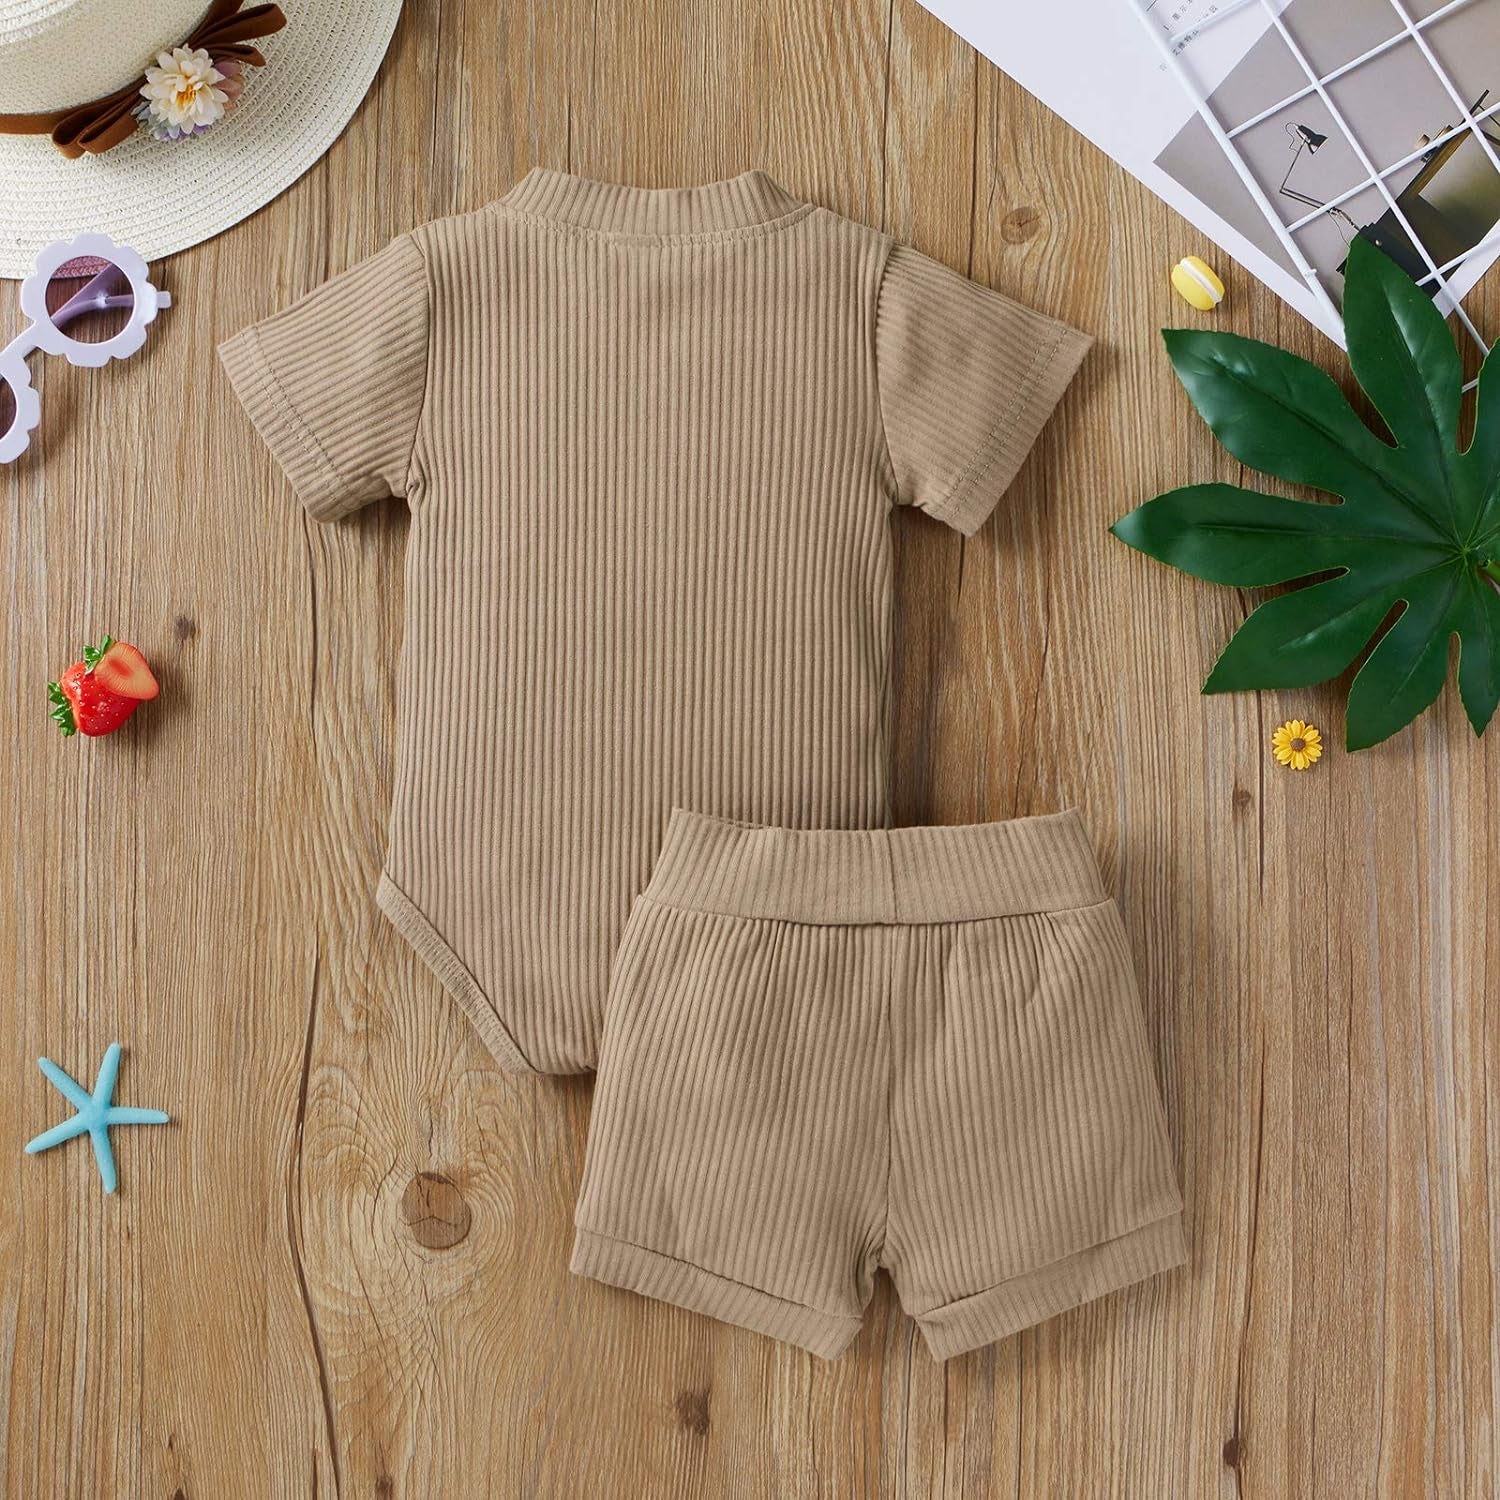 Summer Newborn Baby Boy Girl Clothes Set Ribbed Outfits Unisex Infant Solid Cotton Button Short Sleeve Tops Shorts 2PCS